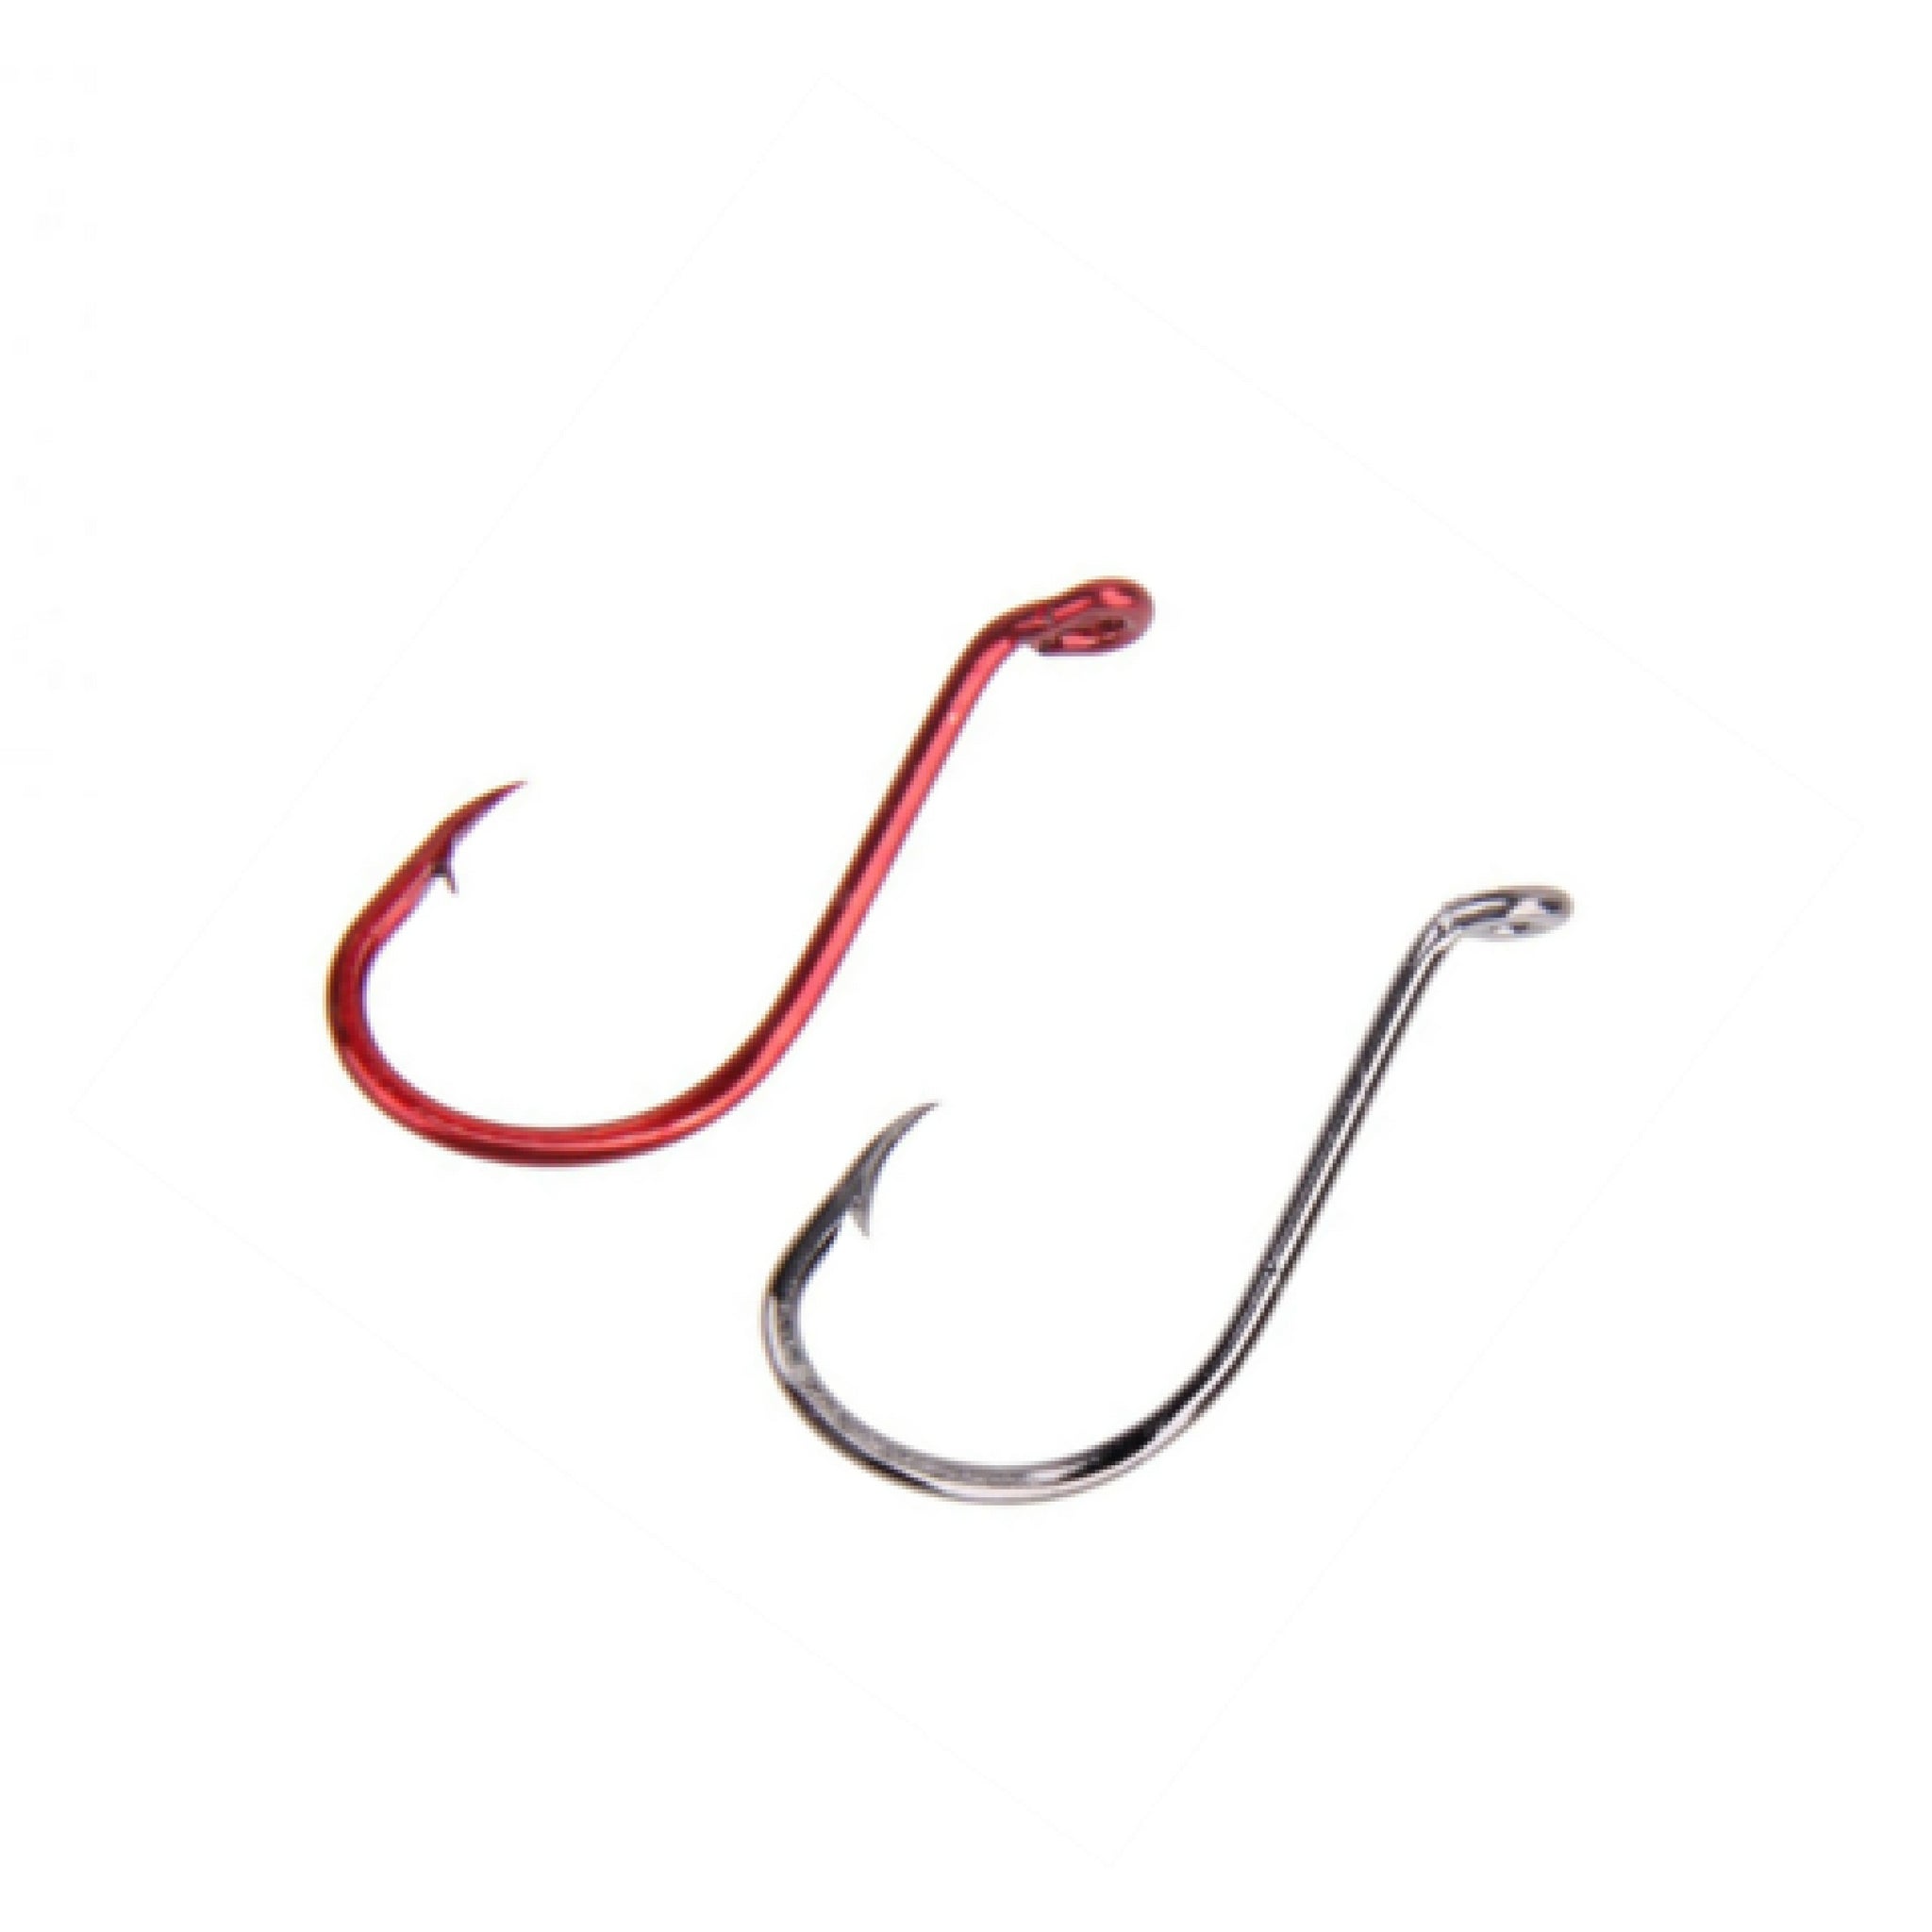 10pcs 7982 Stainless Steel Double Fishing Hooks Big Strong Sharp